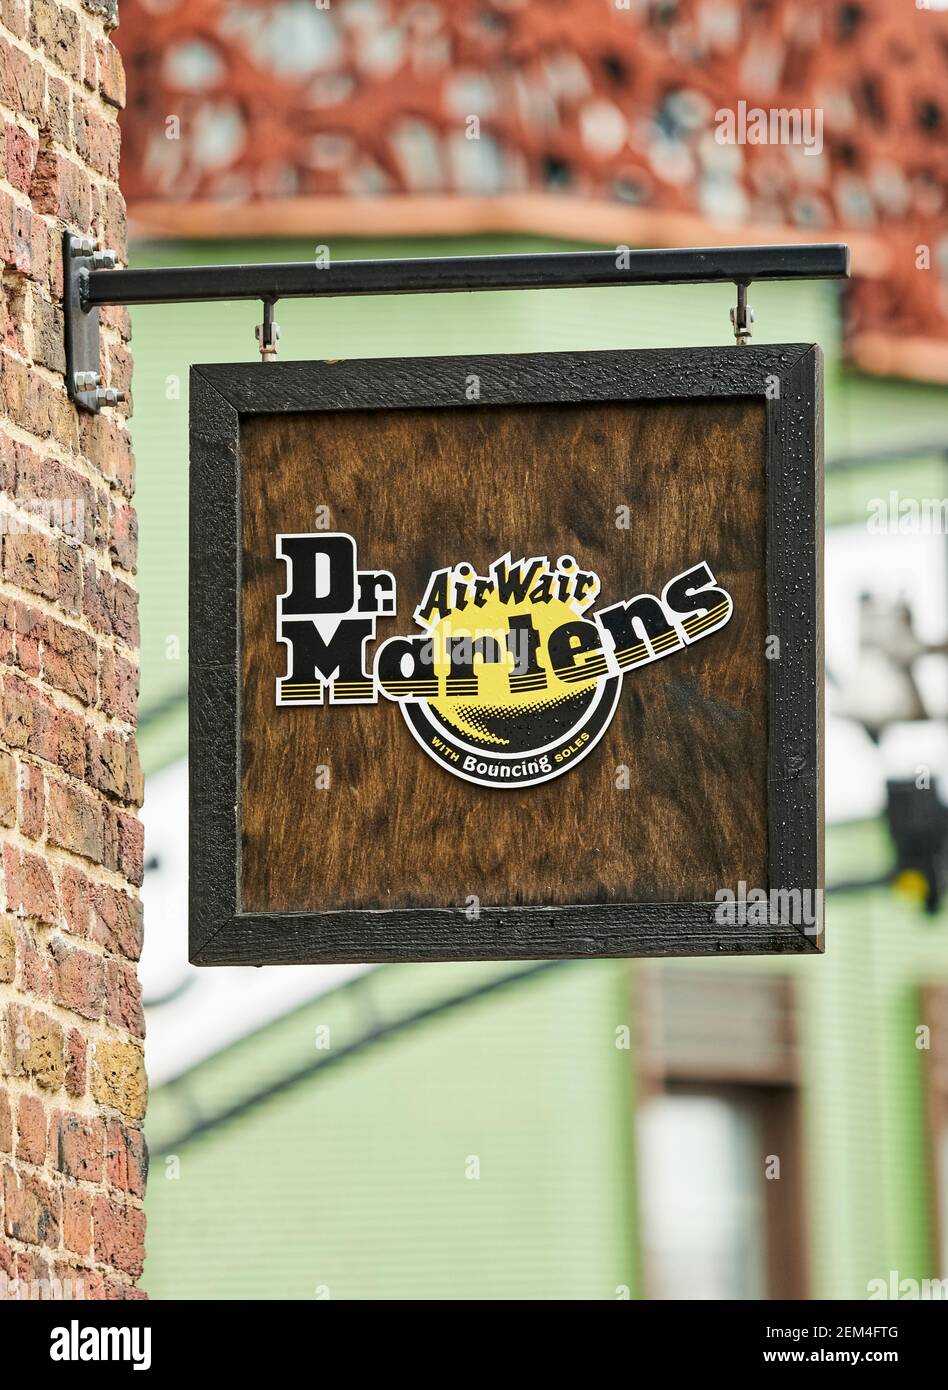 Dr Martens Sign outside shoe shop, Dr Martens footwear was founded in 1947 by Klaus Martens, London, England Stock Photo